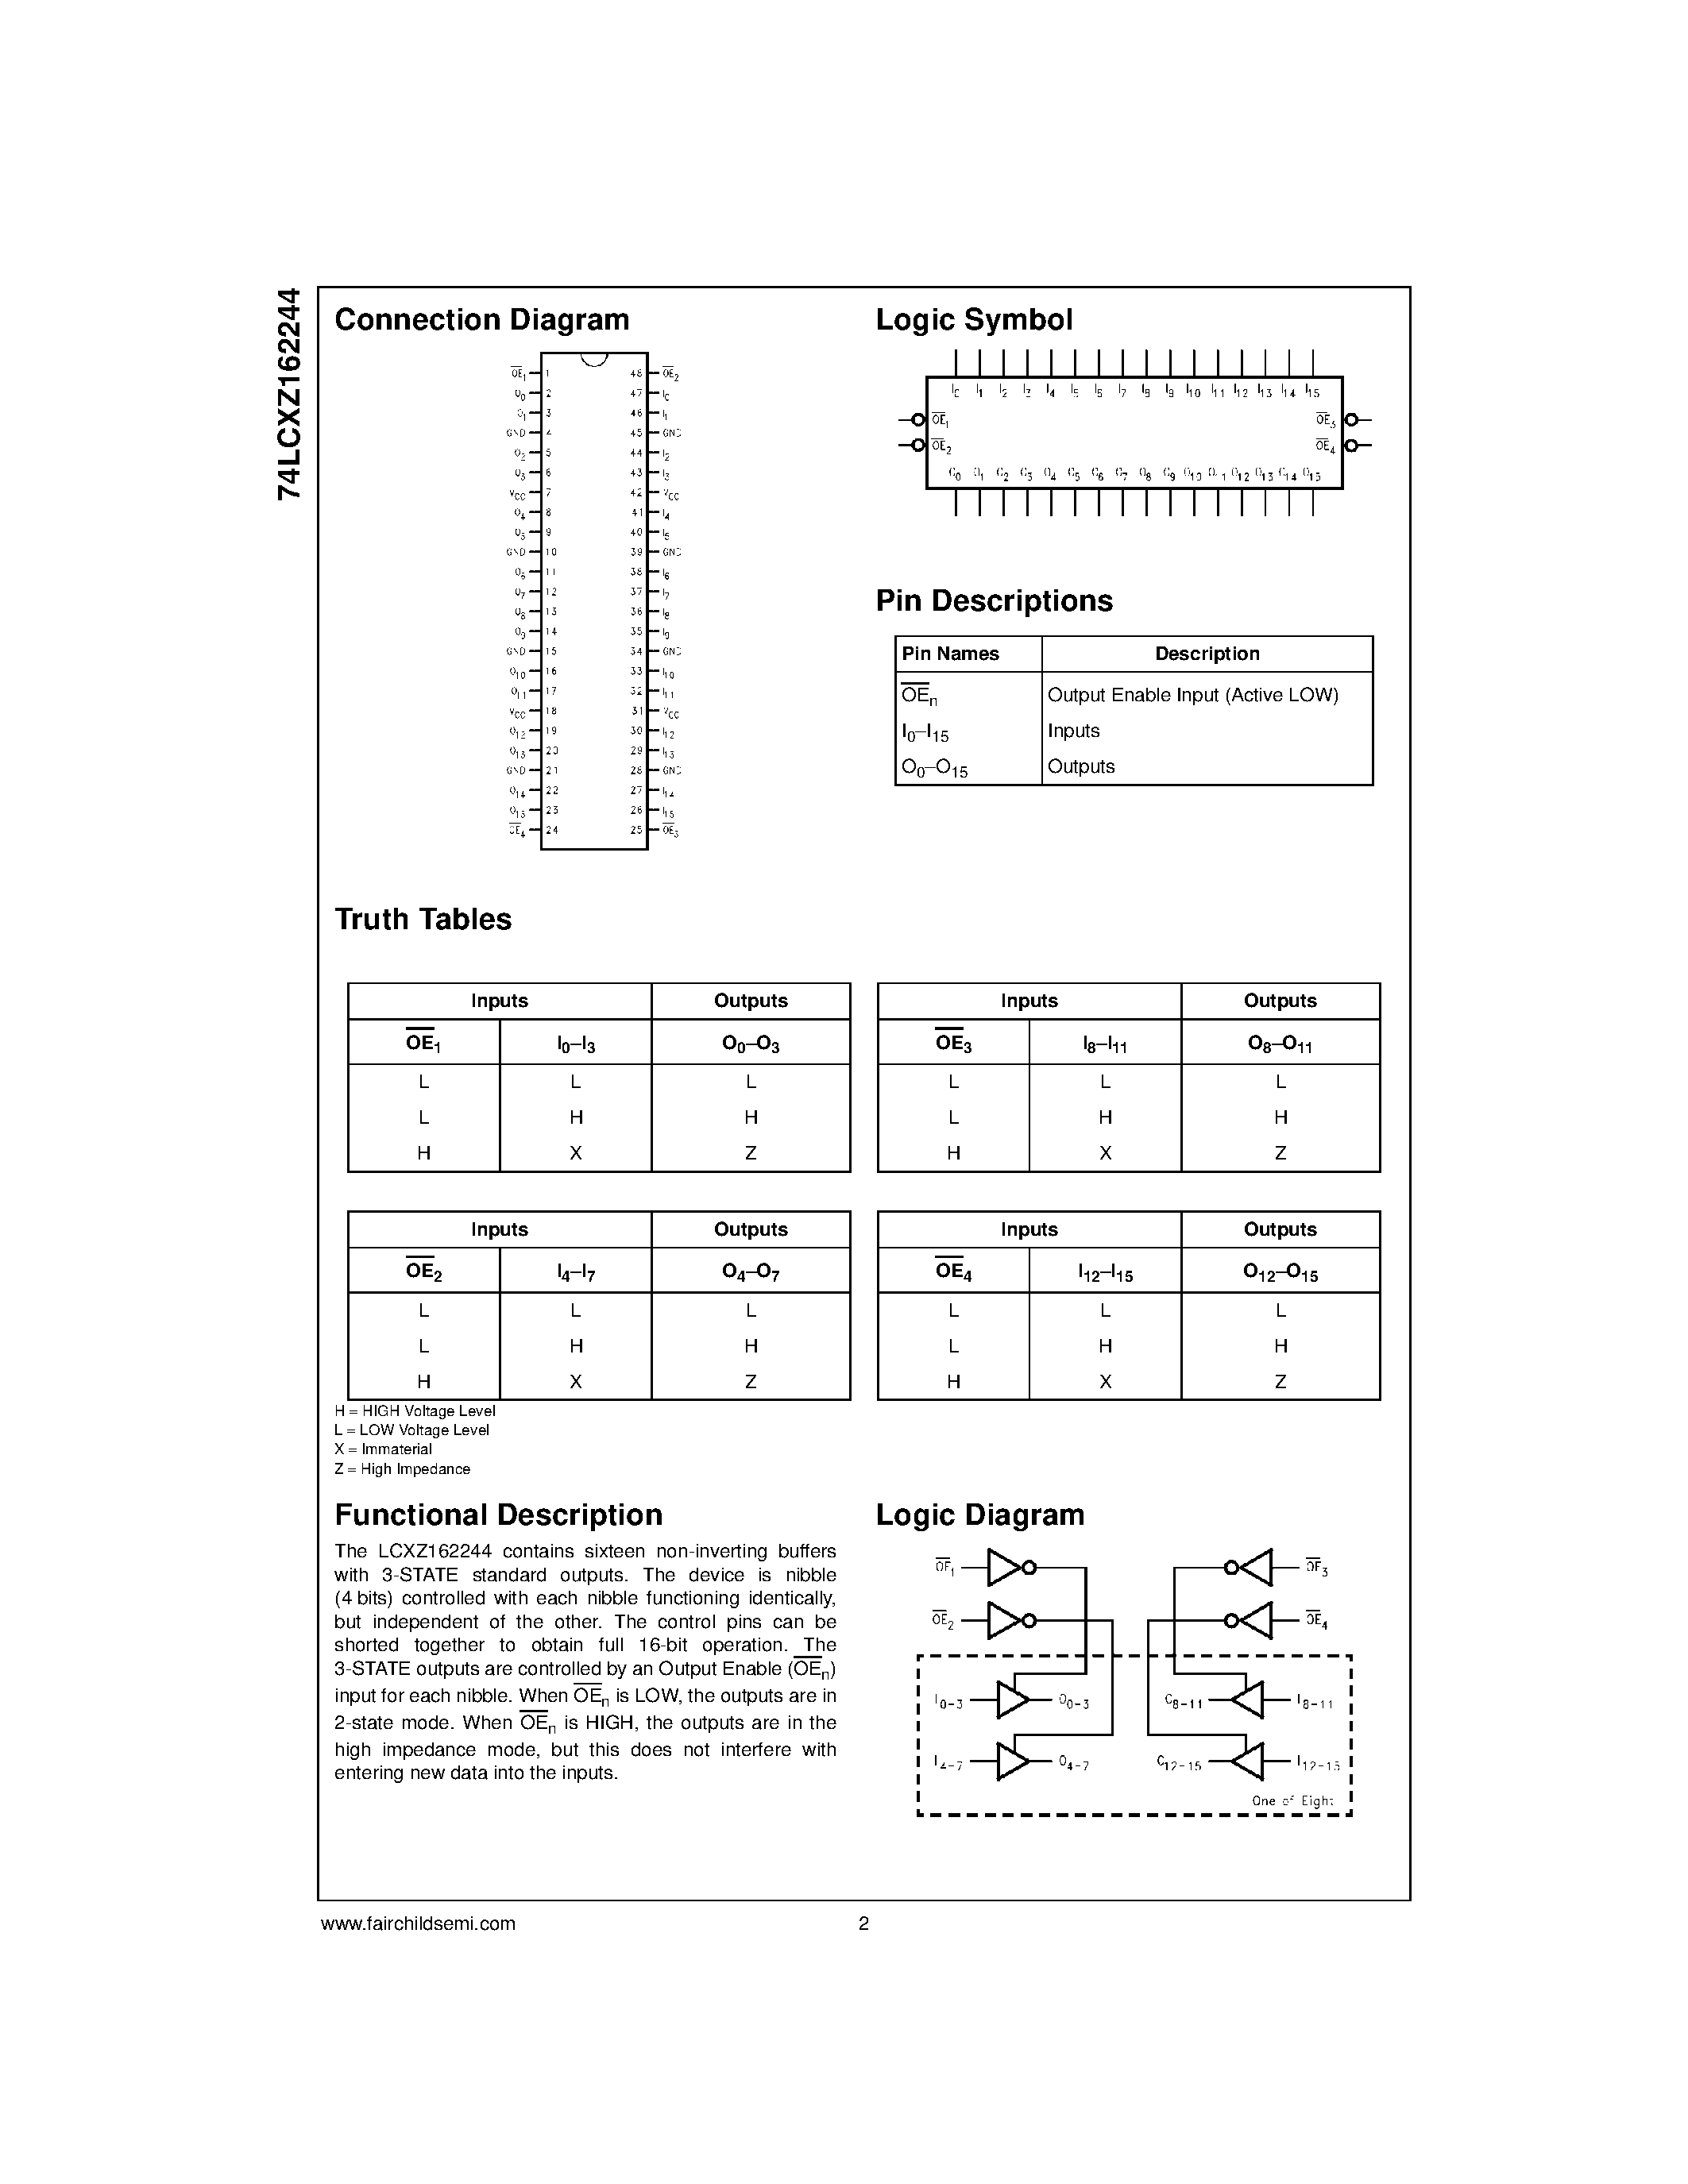 Datasheet 74LCXZ162244MTD - Low Voltage 16-Bit Buffer/Line Driver with 5V Tolerant Inputs/Outputs and 26 Series Resistors in the Outputs page 2